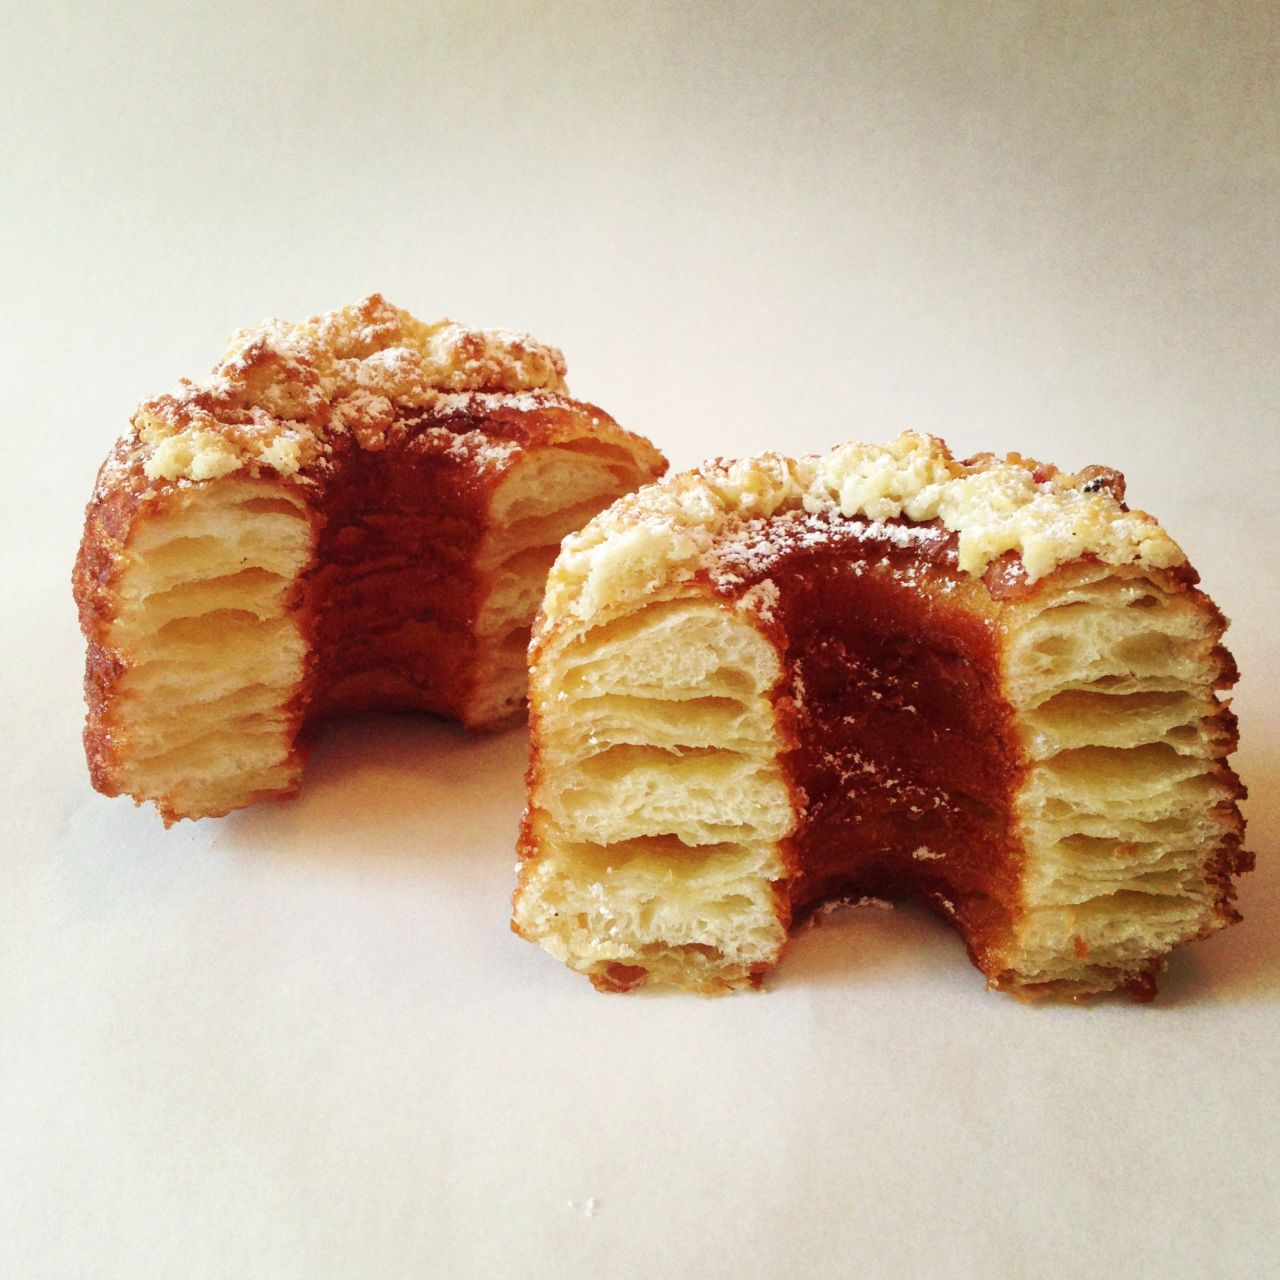 The Good -- Bakeries in the Spotlight: The Cronut (that's Dominique Ansel Bakery's doughnut-croissant hybrid) craze was noteworthy, but bakeries across the country were having the best year ever.